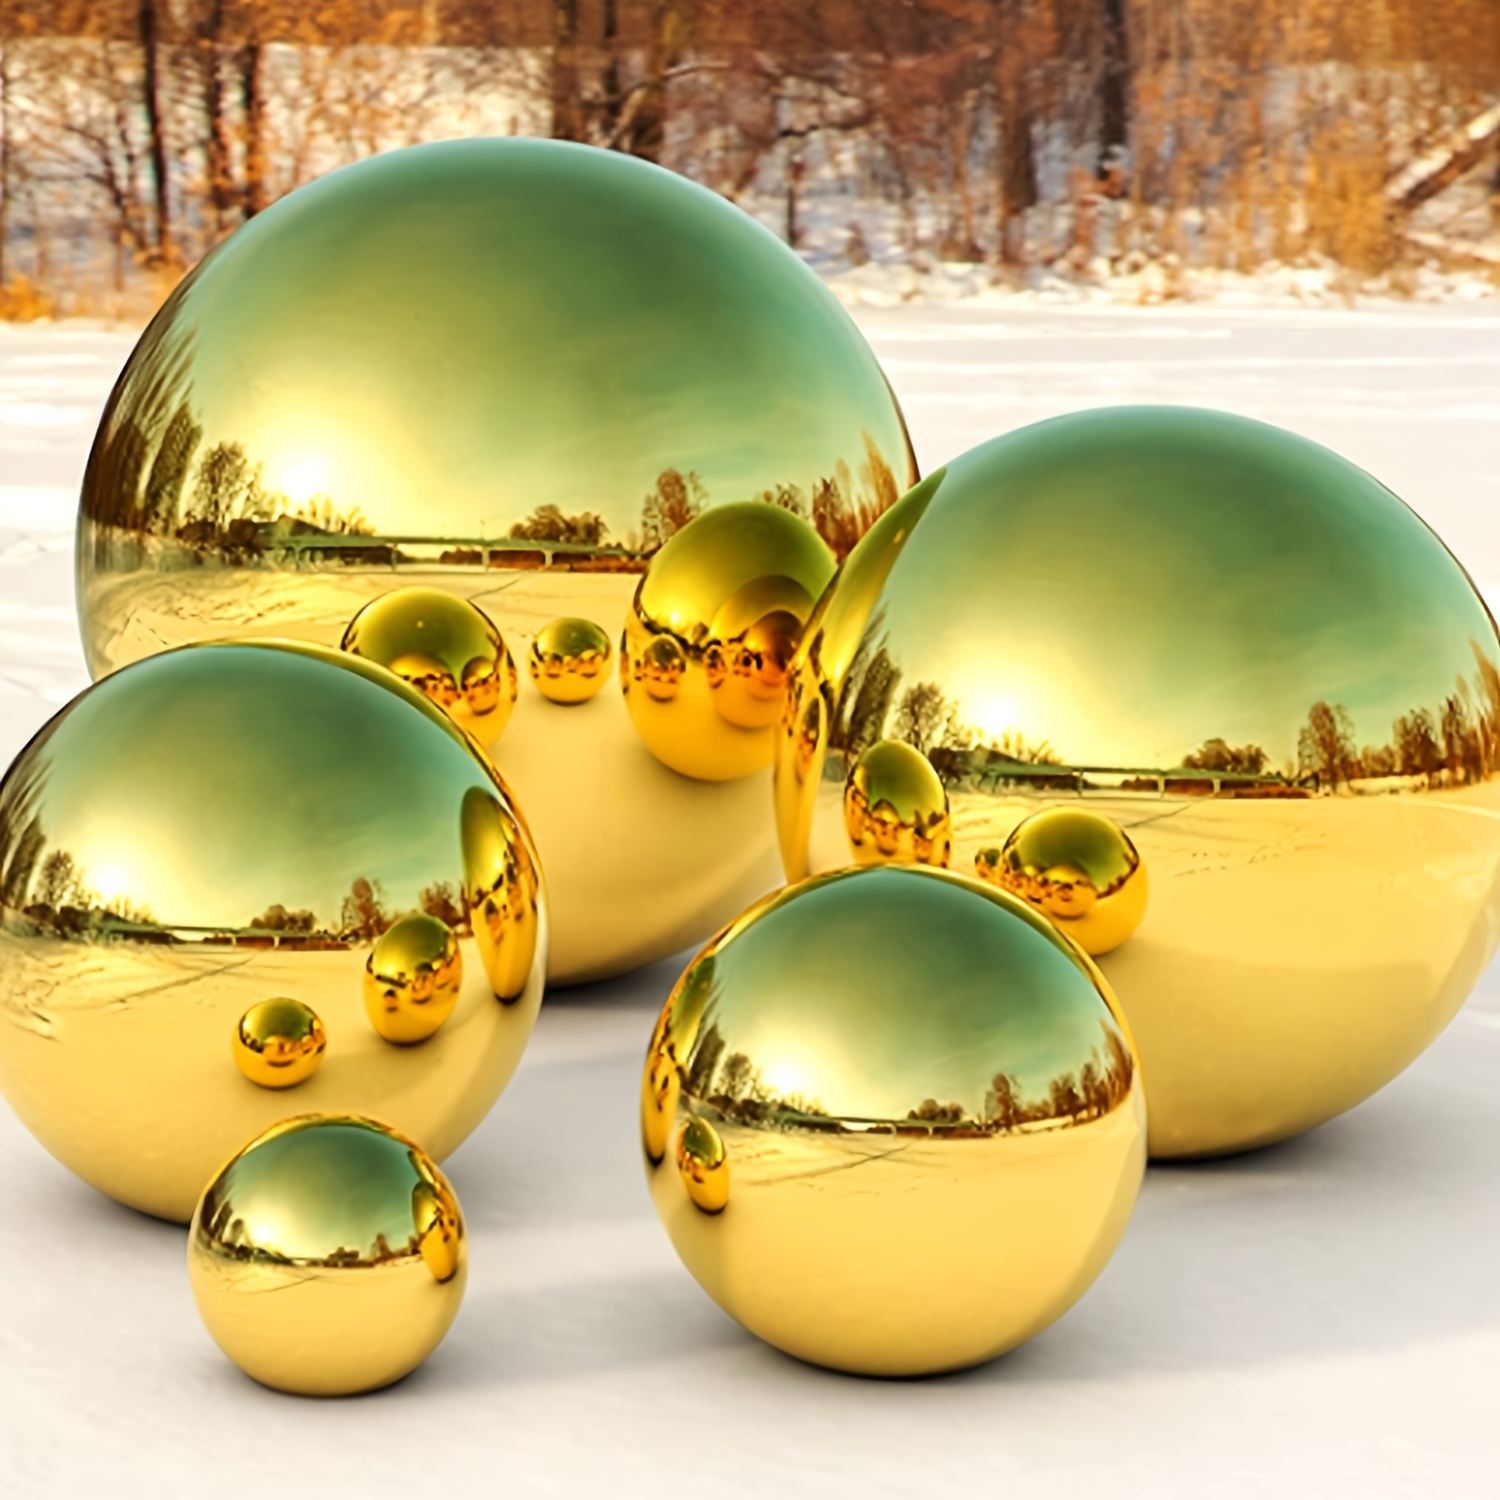 

Garden Decorative Mirrored Balls: Shiny Golden, Suitable For Home Gardens, Available In Sizes 32mm, 51mm, 76mm, And 120mm, Made Of Stainless Steel